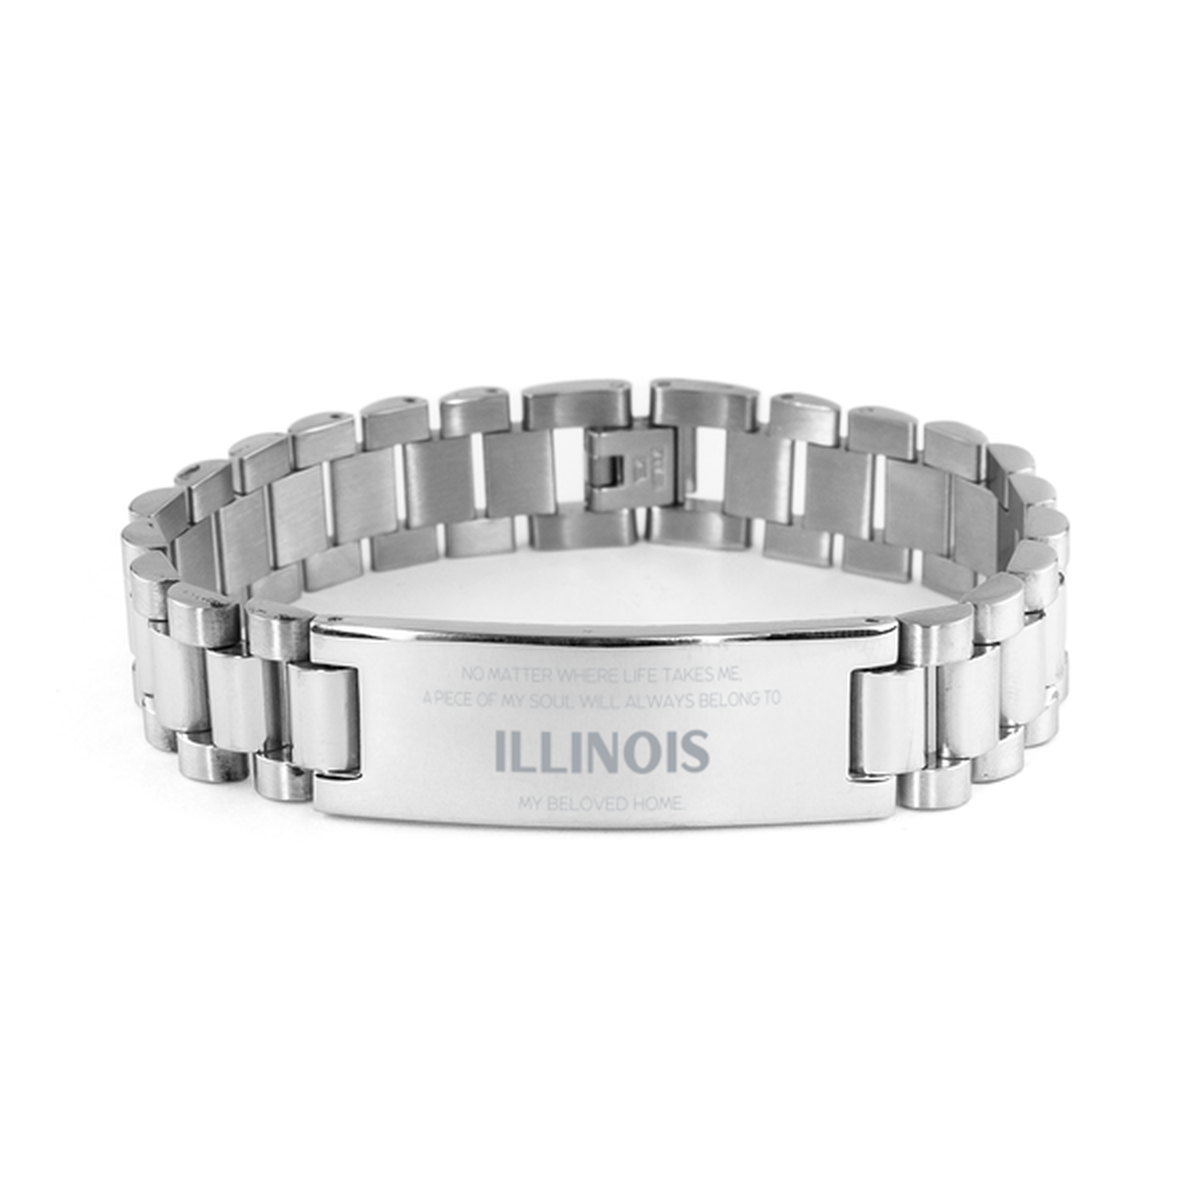 Love Illinois State Gifts, My soul will always belong to Illinois, Proud Ladder Stainless Steel Bracelet, Birthday Unique Gifts For Illinois Men, Women, Friends